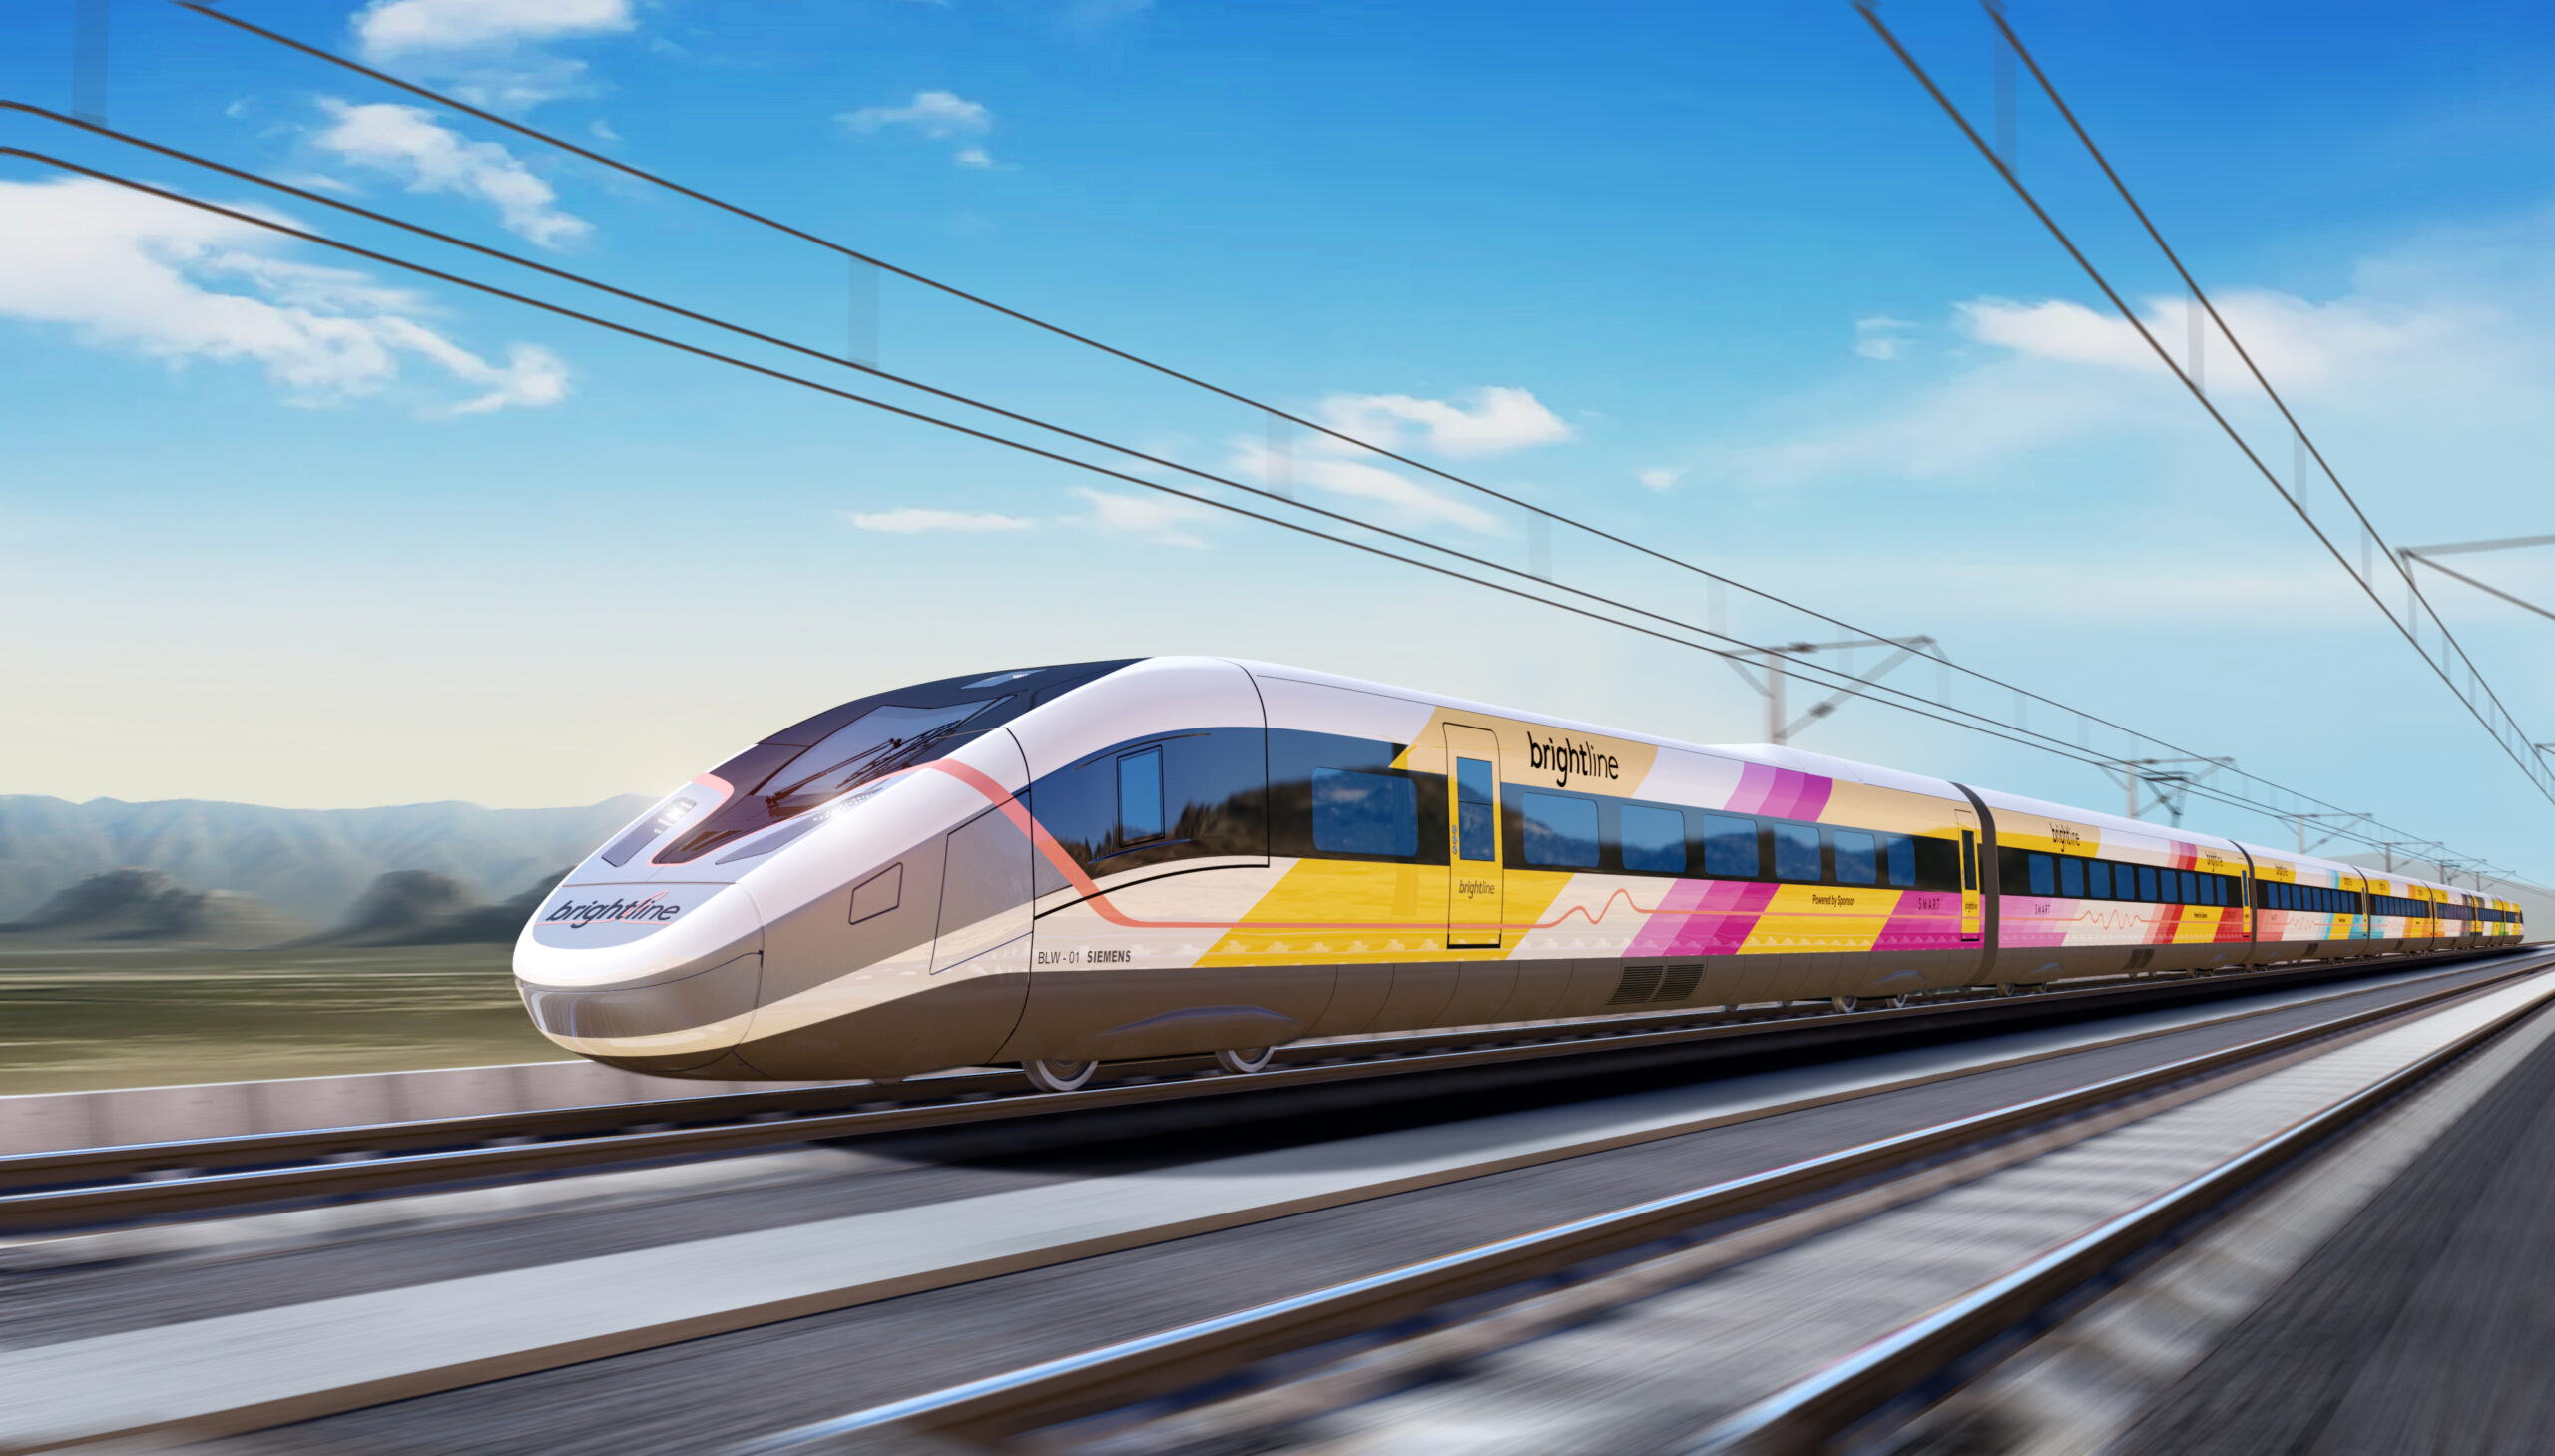 With the selection, Siemens will introduce the AP220 trainsets which represent a new generation of innovative high-speed technology